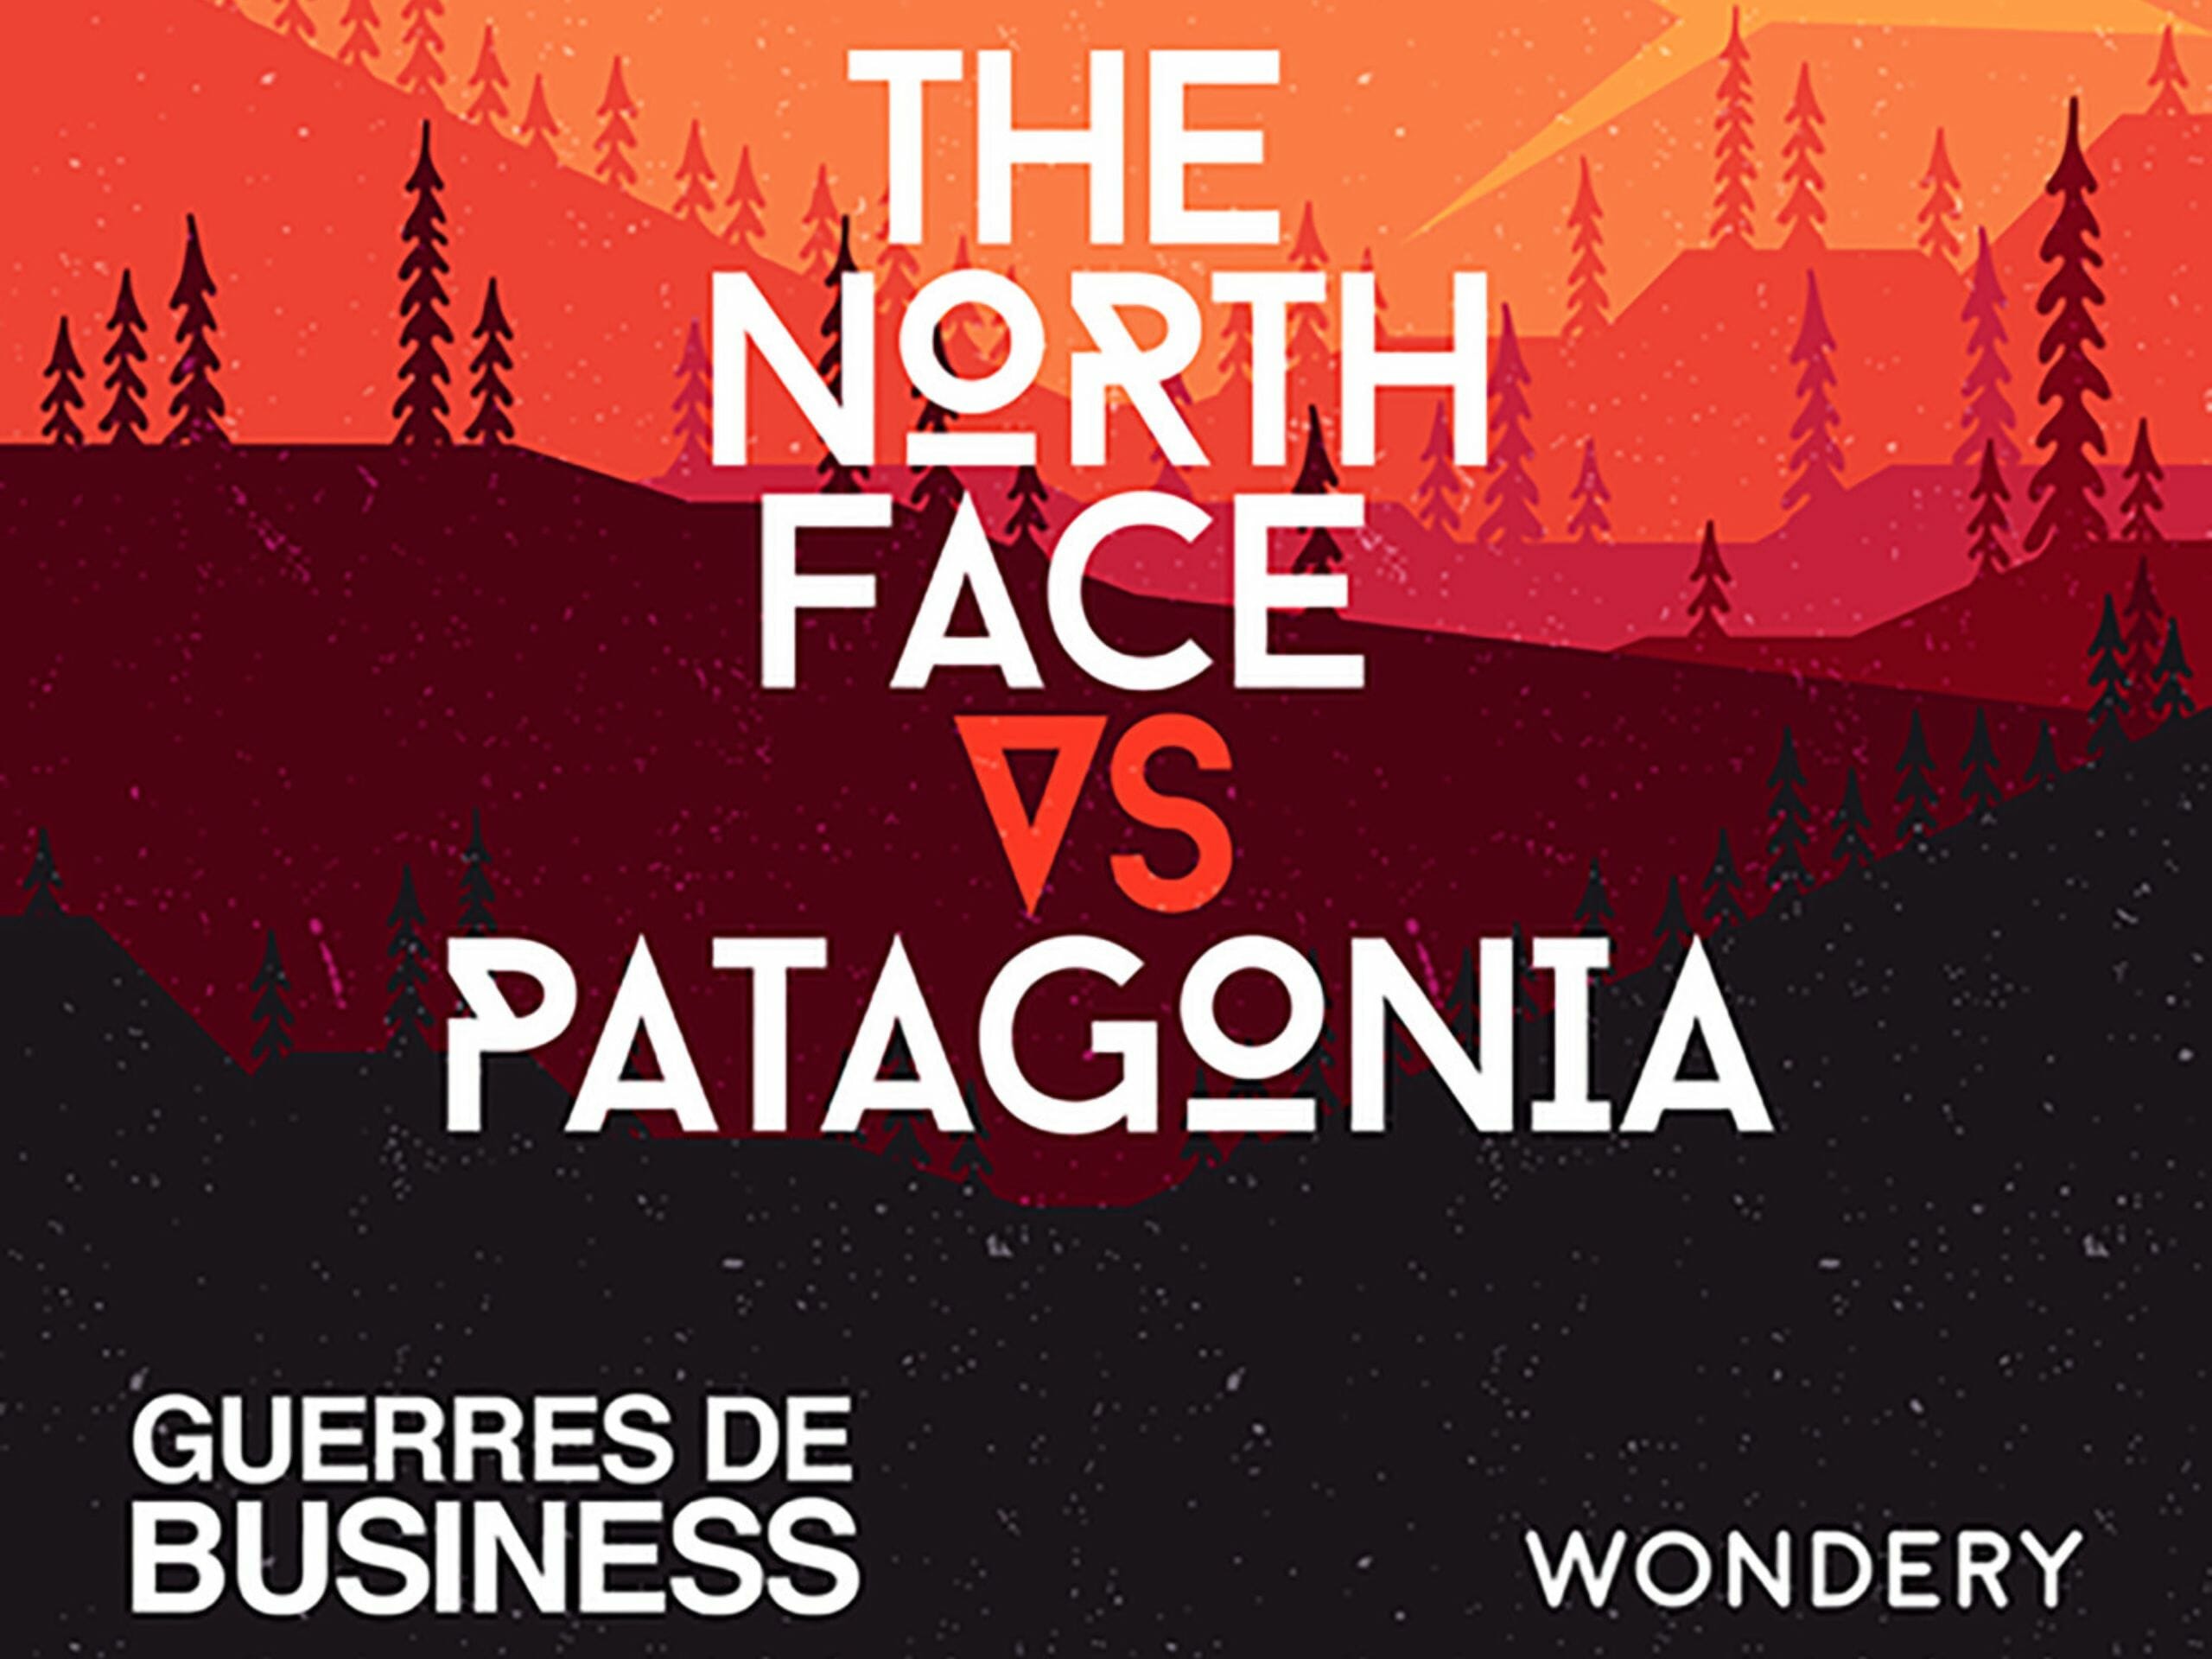 Patagonia VS The North Face